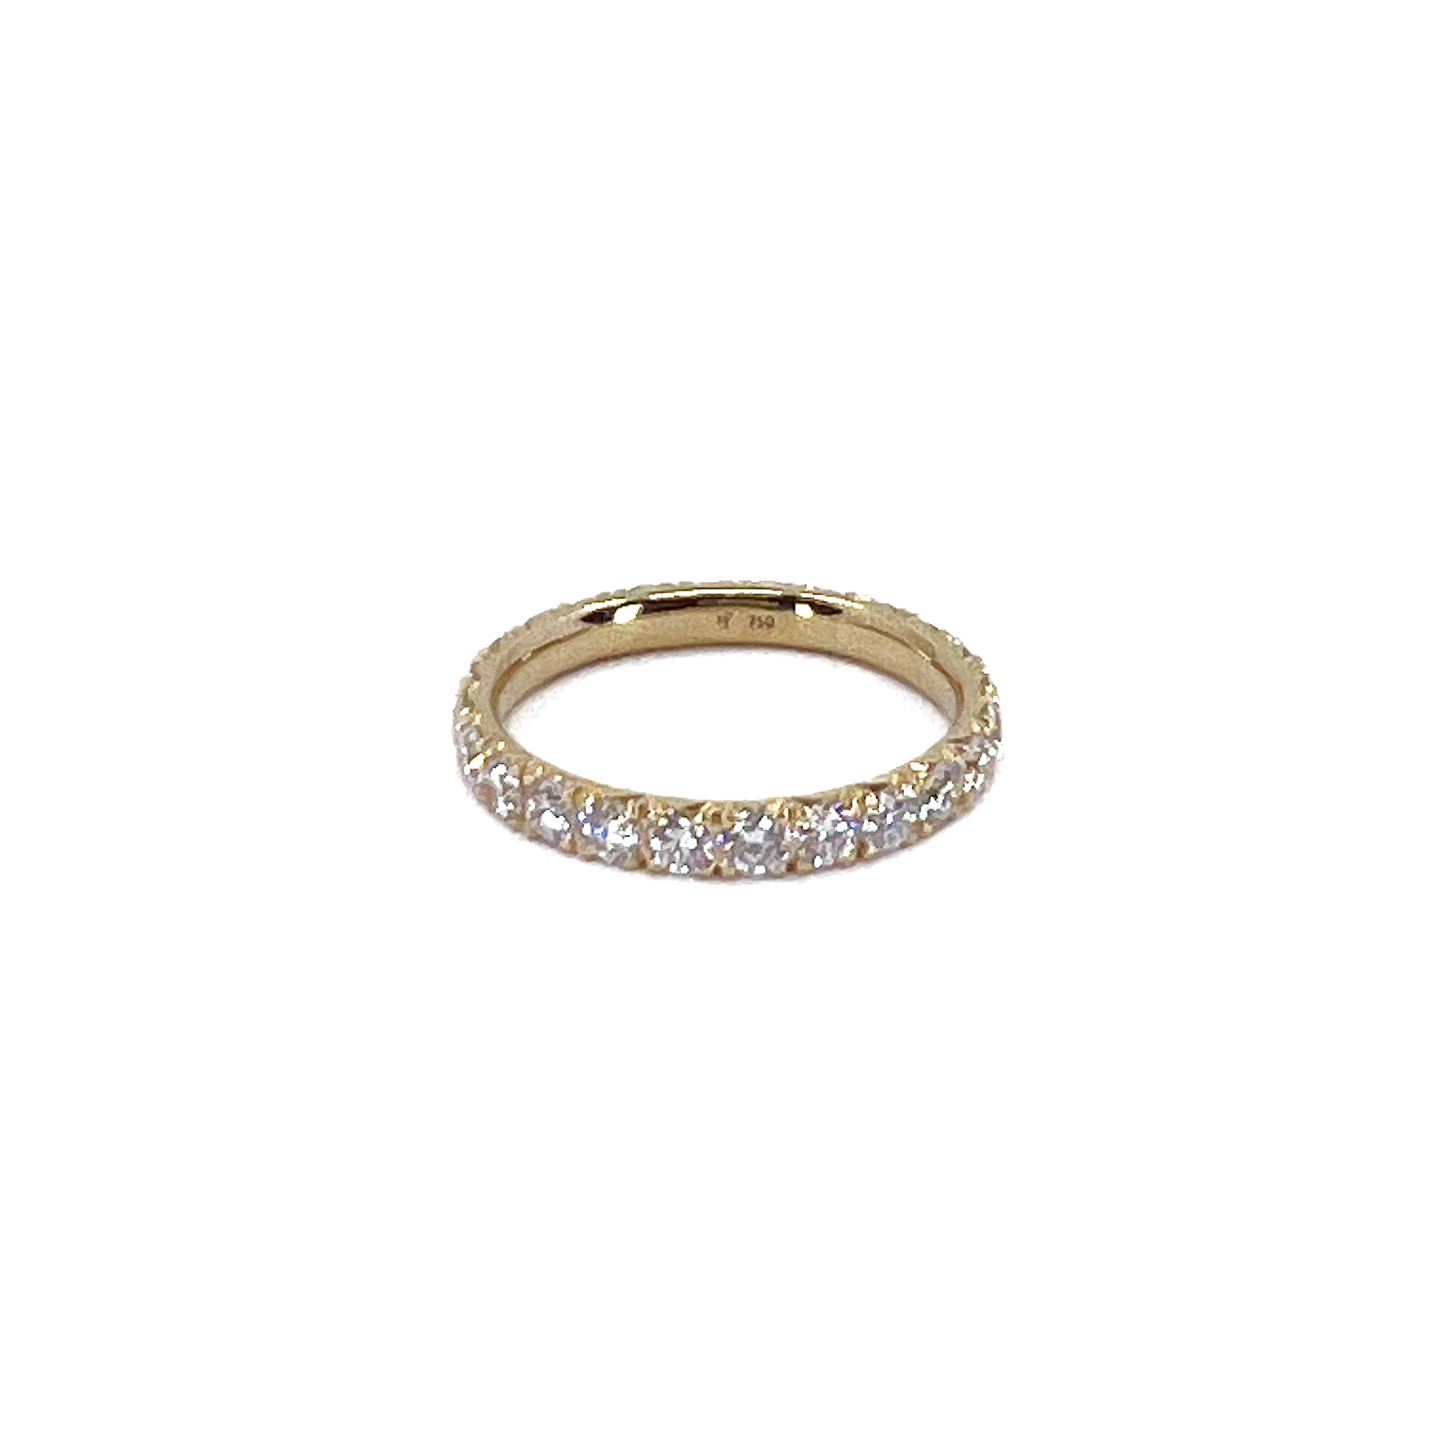 1.33 CT Diamond and Yellow Gold Eternity Band | Von Bargen's Jewelry